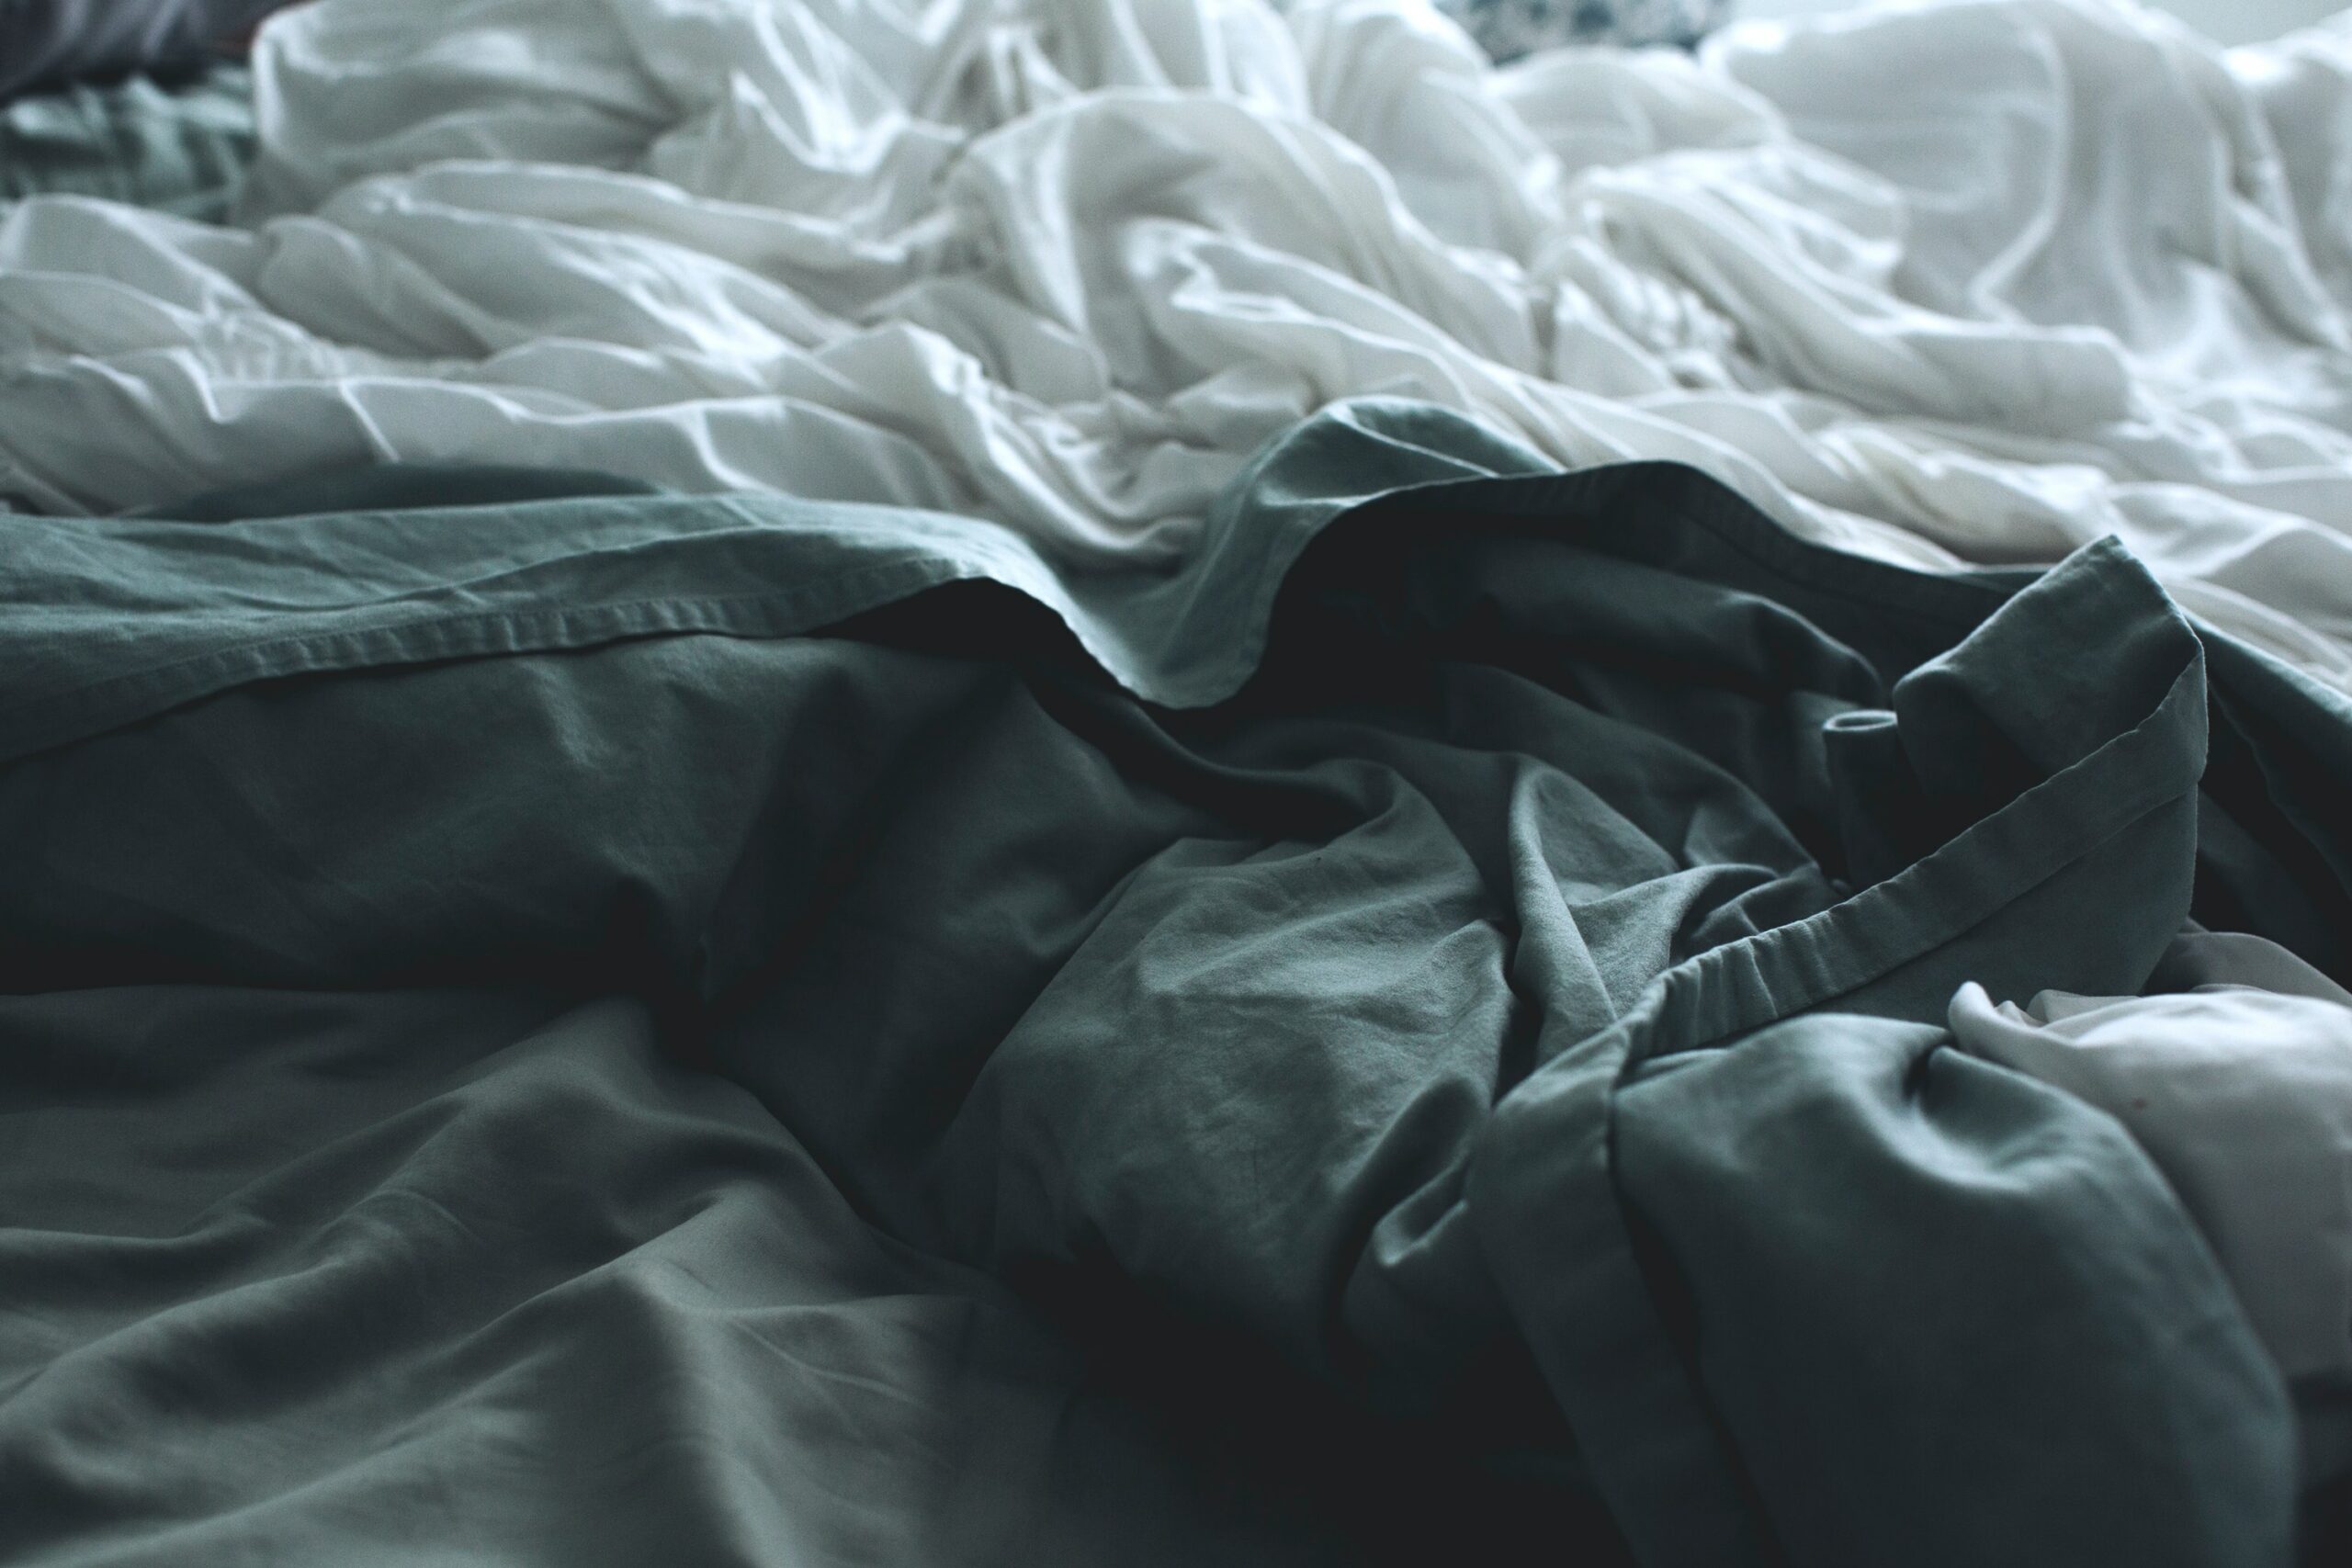 Can The Colour of Your Bedding Affect Your Sleep?